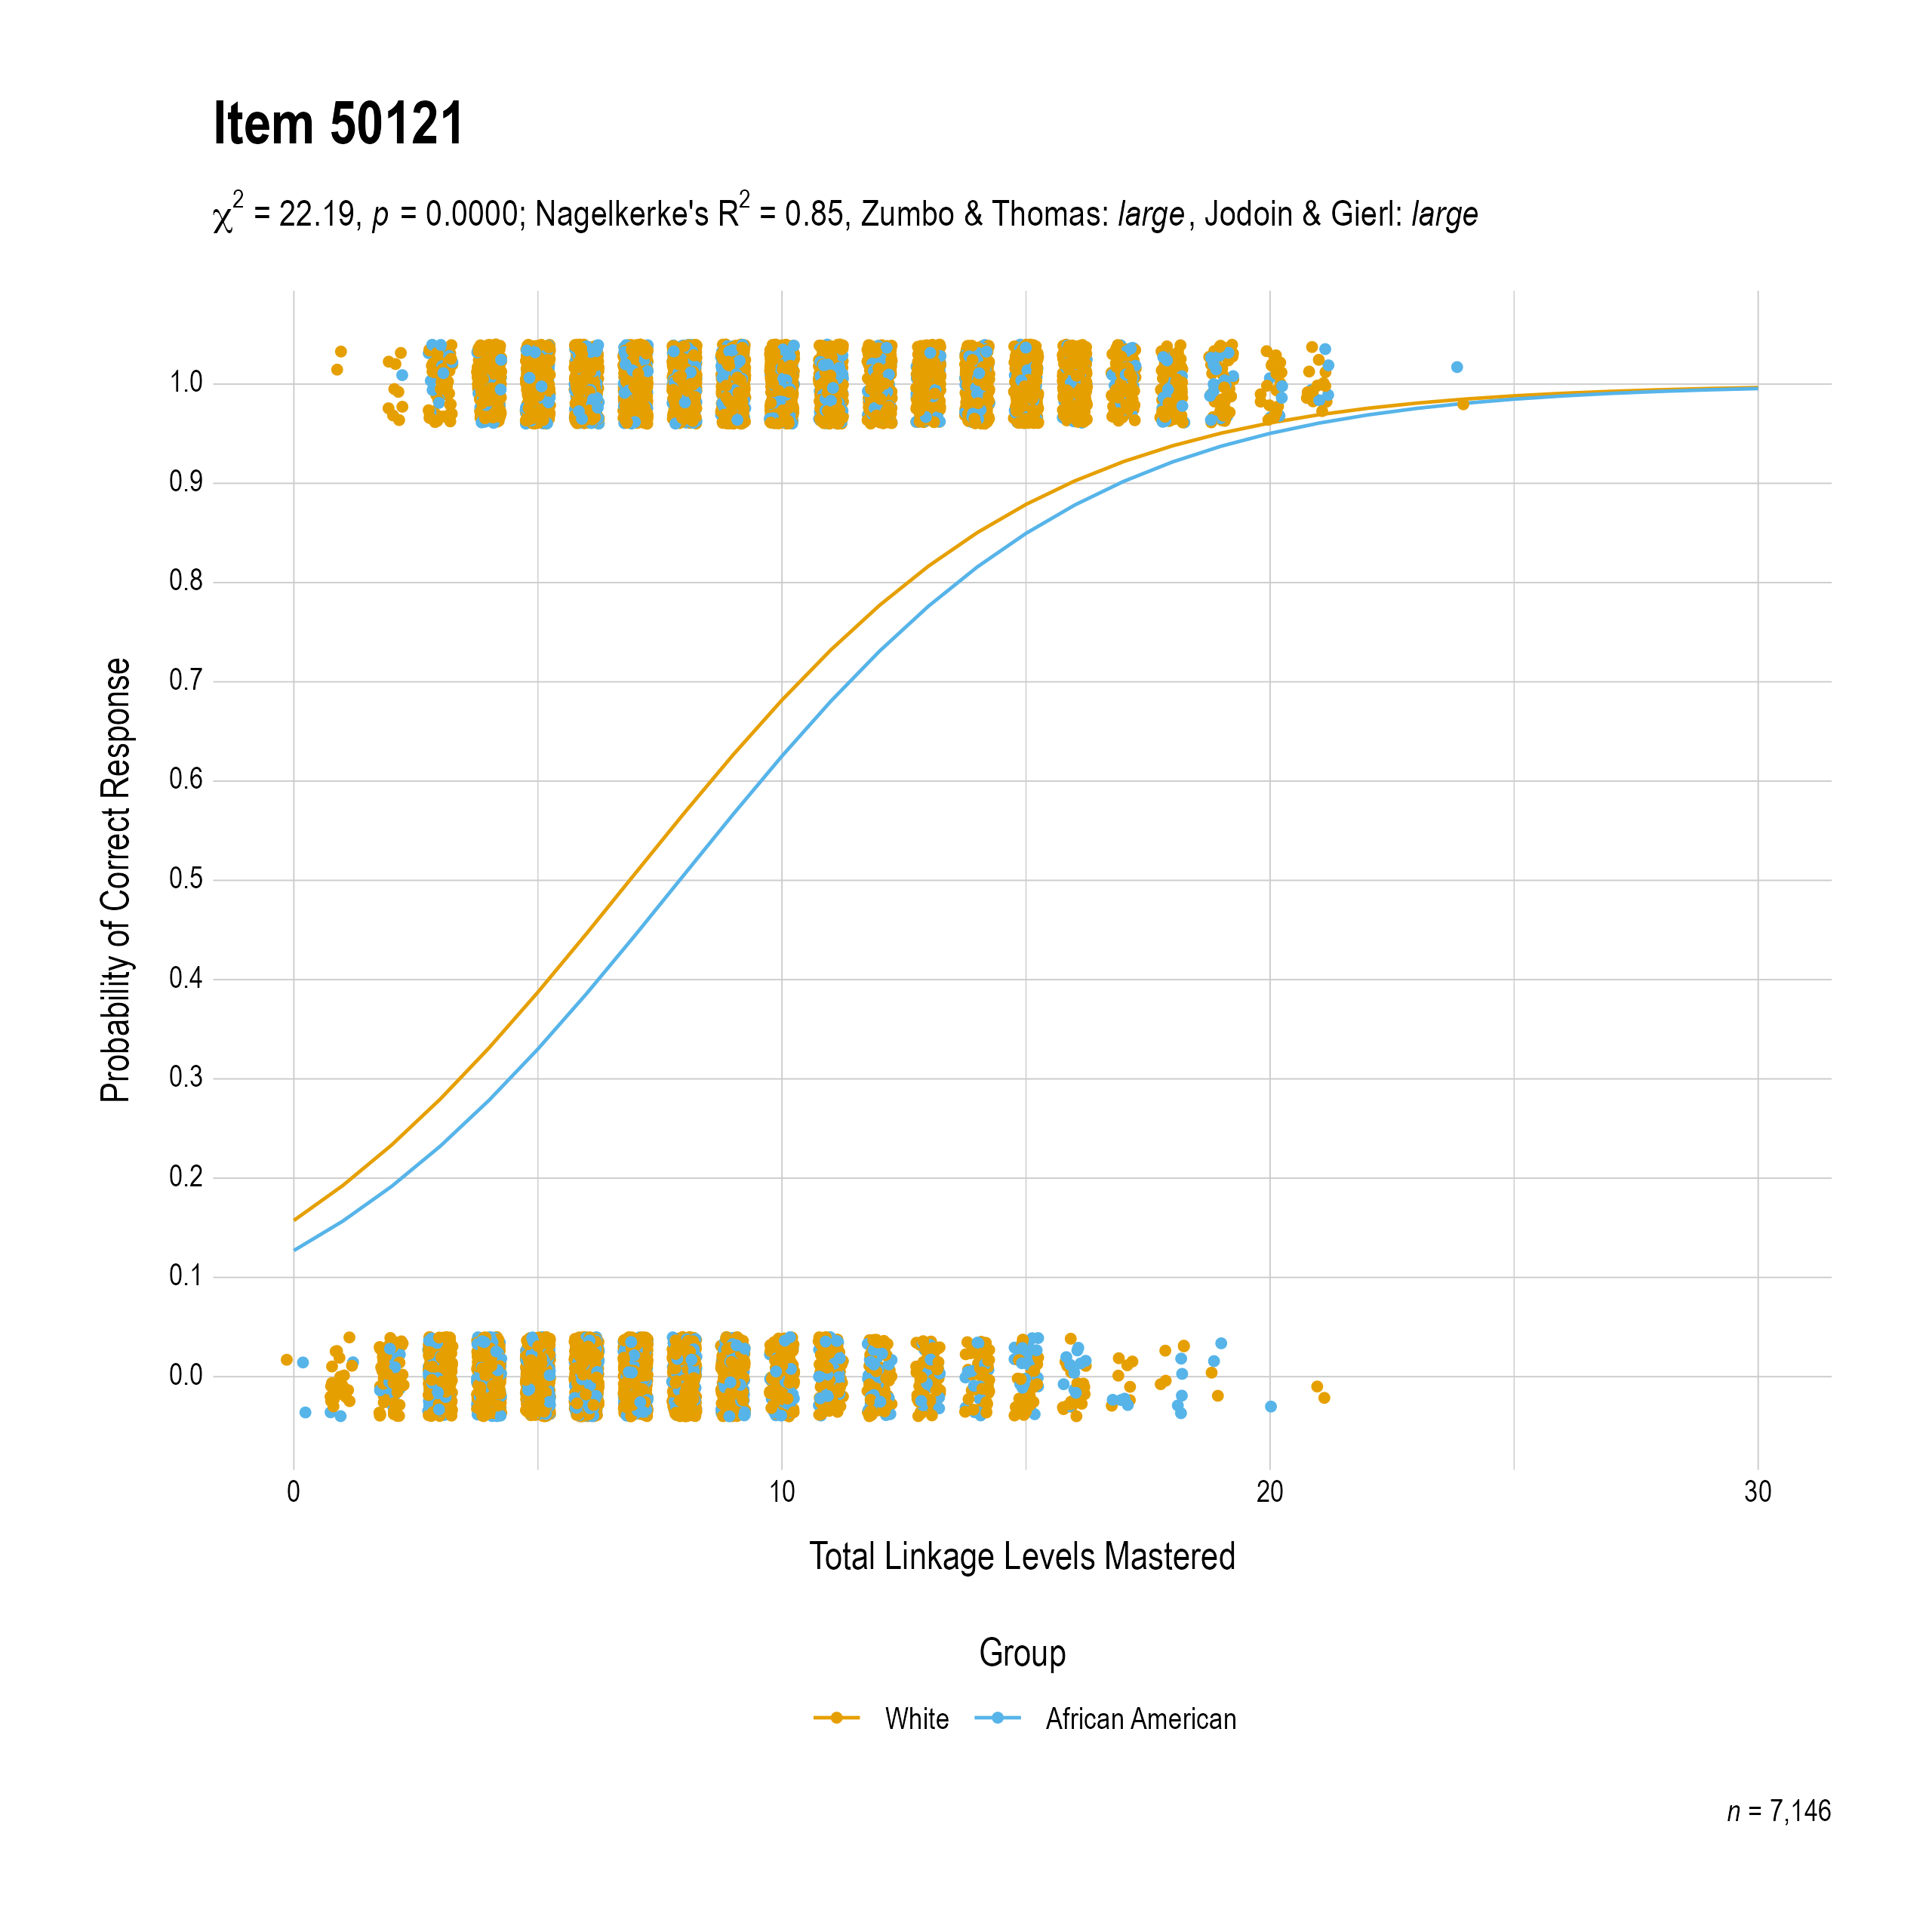 The plot of the uniform race differential item function evidence for Science item 50121. The figure contains points shaded by group. The figure also contains a logistic regression curve for each group. The total linkage levels mastered in is on the x-axis, and the probability of a correct response is on the y-axis.